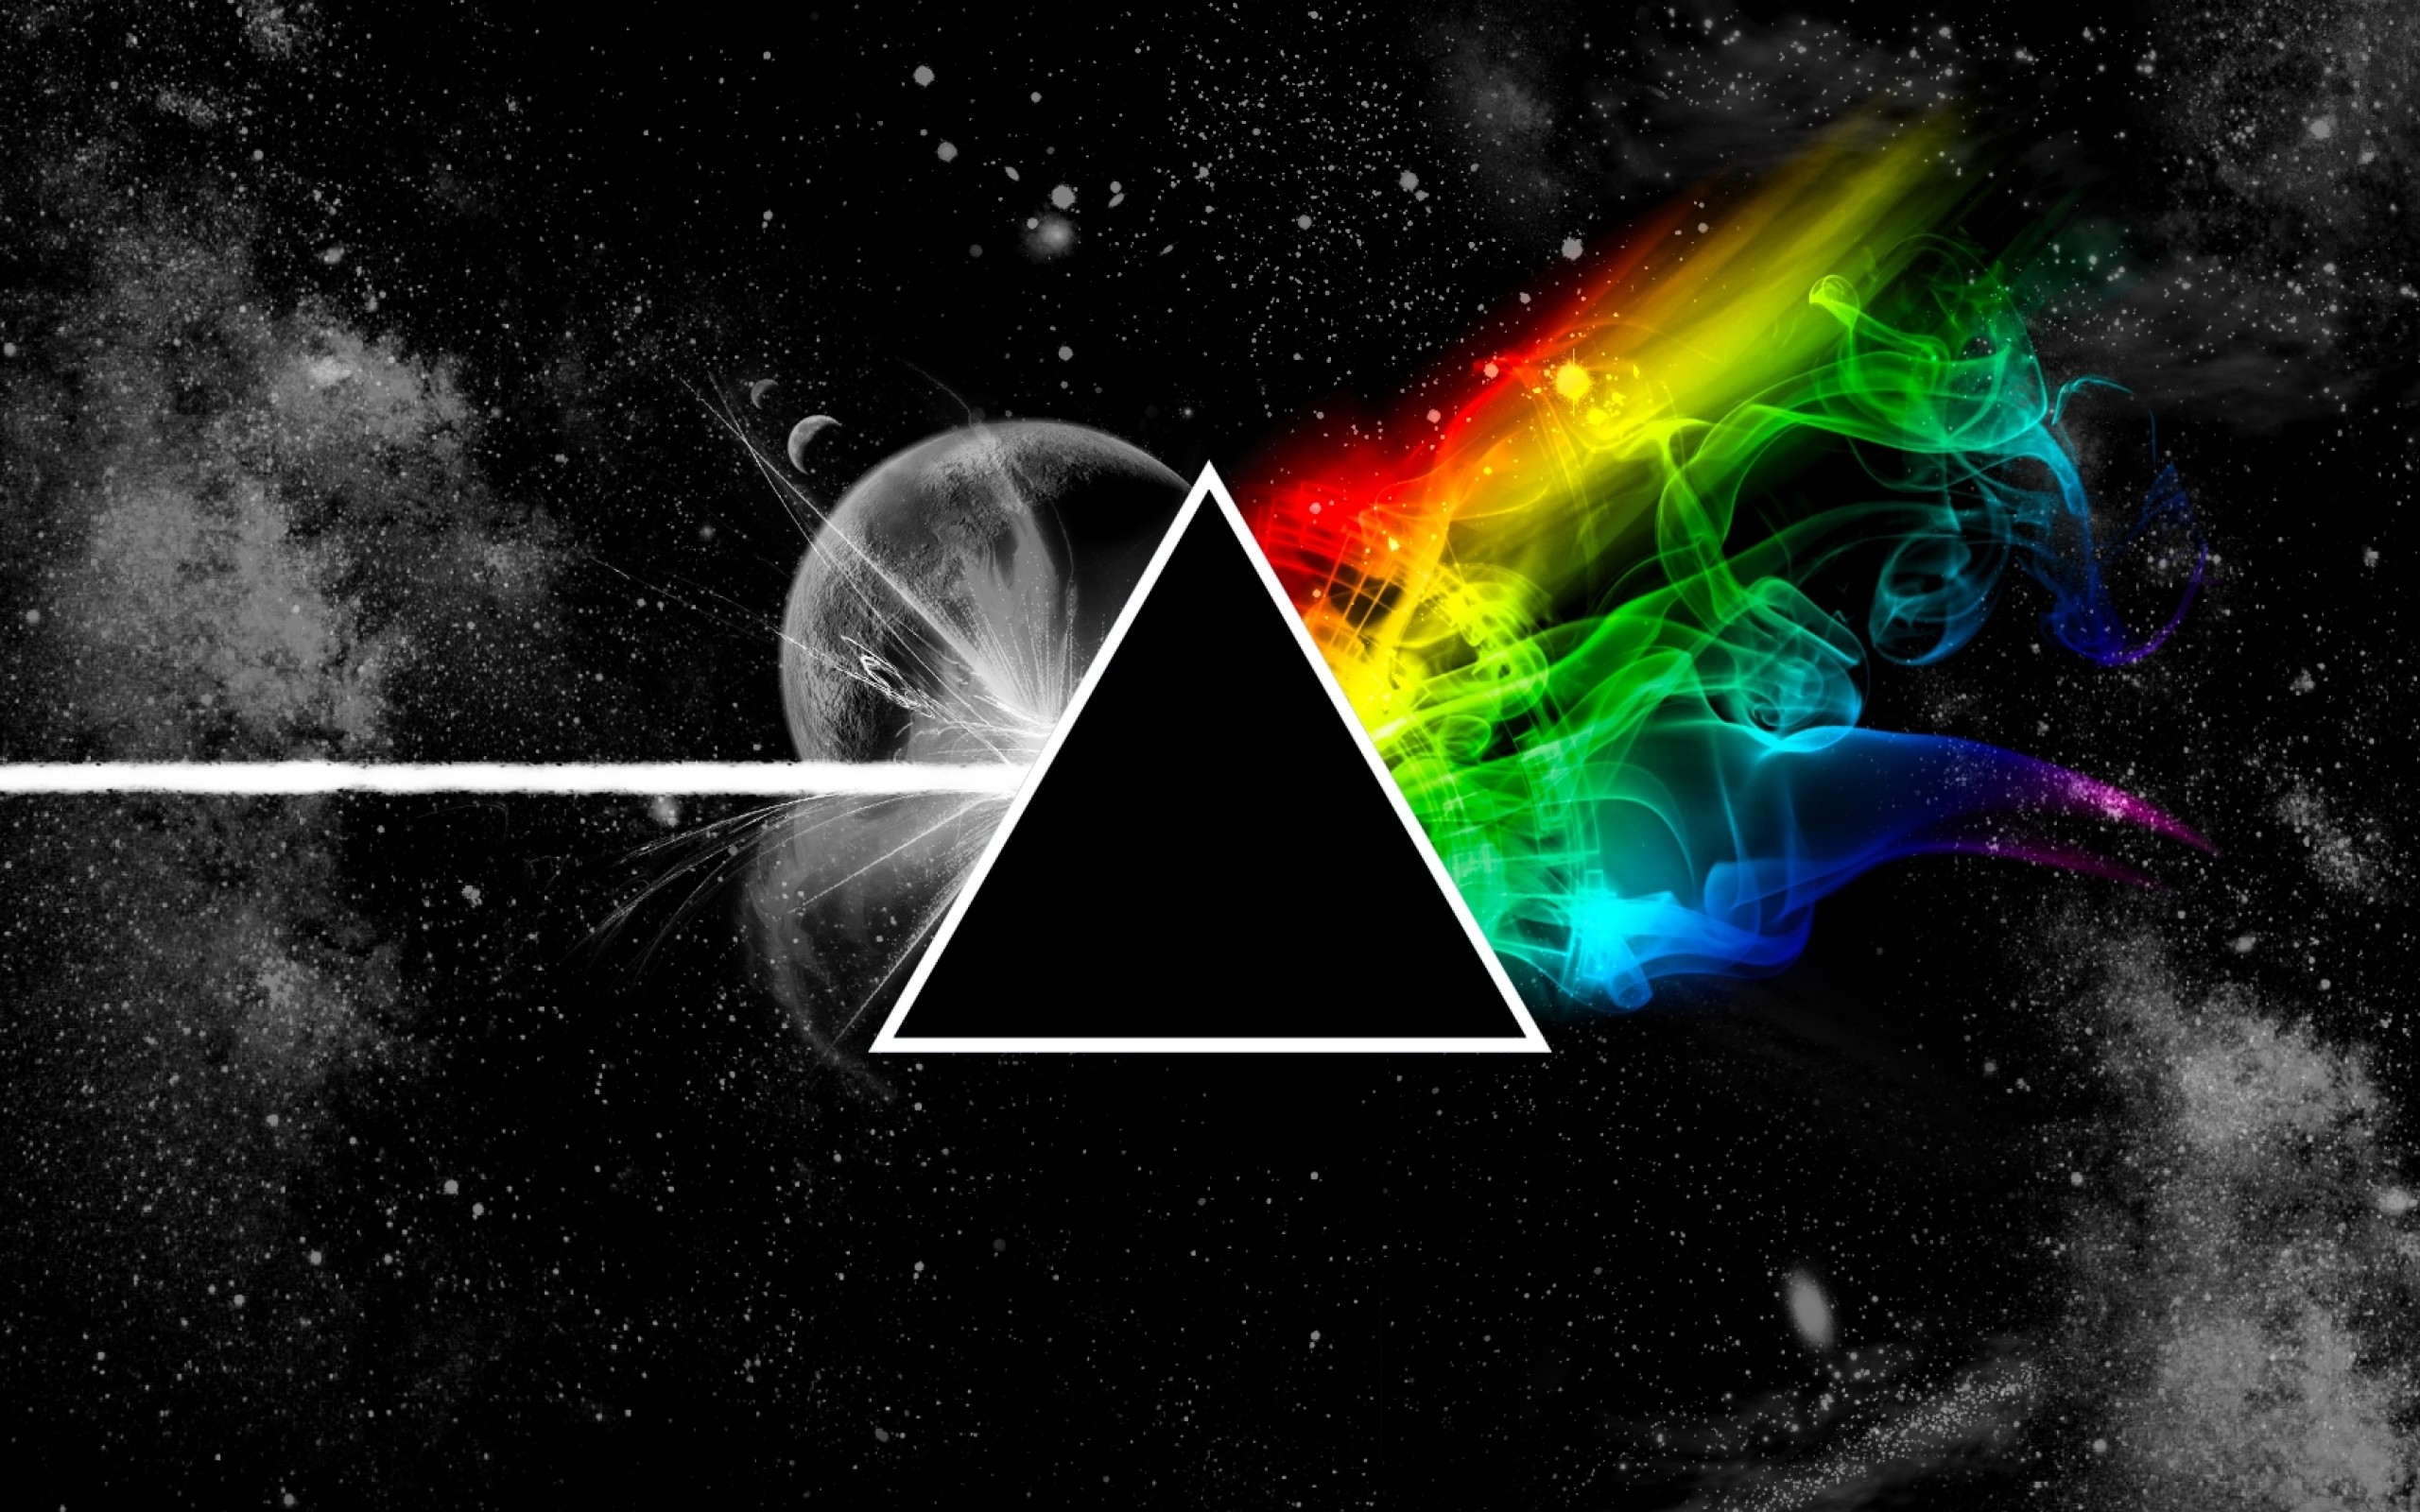 4592209 Pink Floyd prism cover art album covers  Rare Gallery HD  Wallpapers